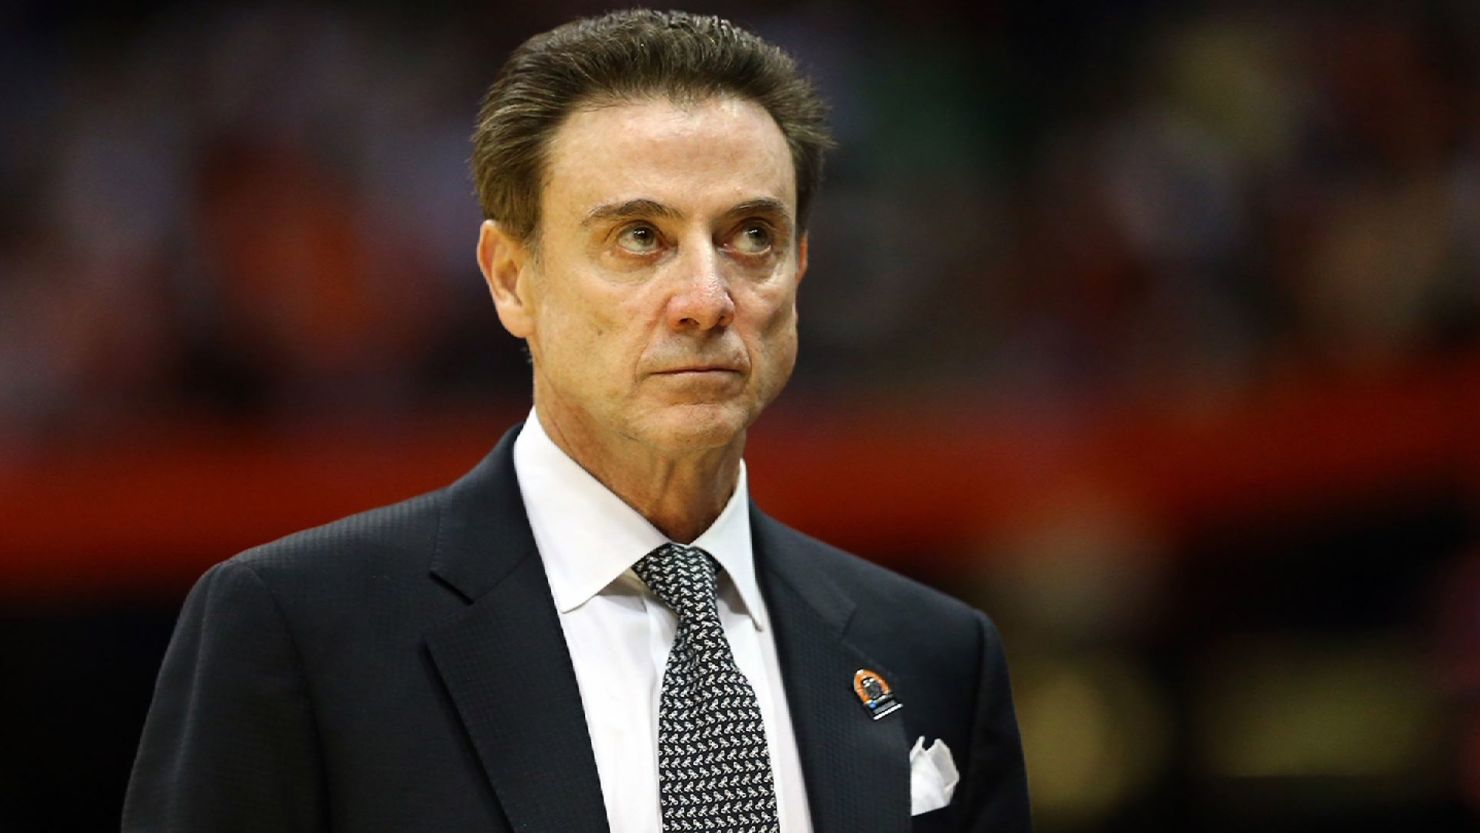 Louisville coach Rick Pitino said he was unaware of any wrongdoing.